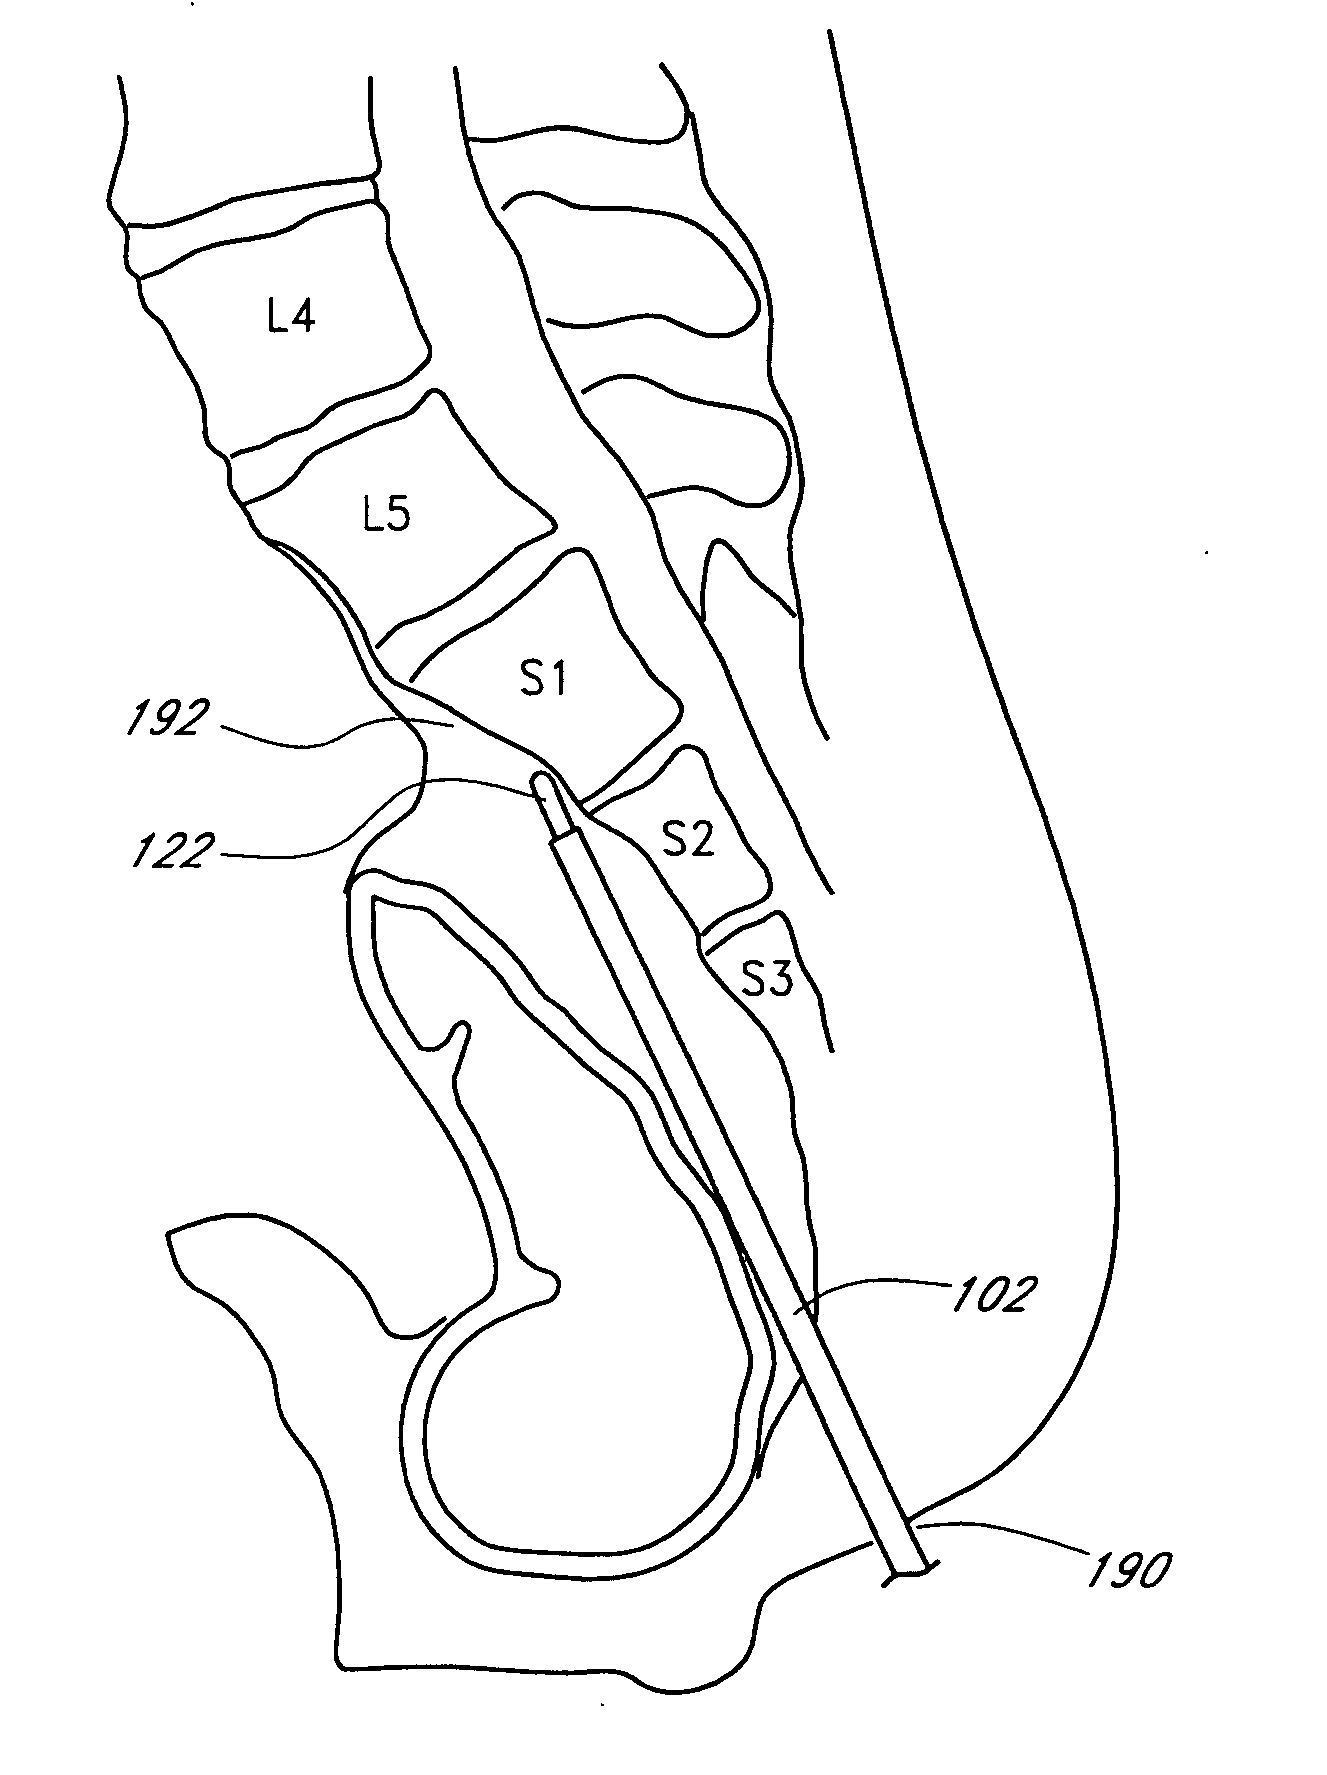 Method and apparatus for introducing material along an access path to a treatment site